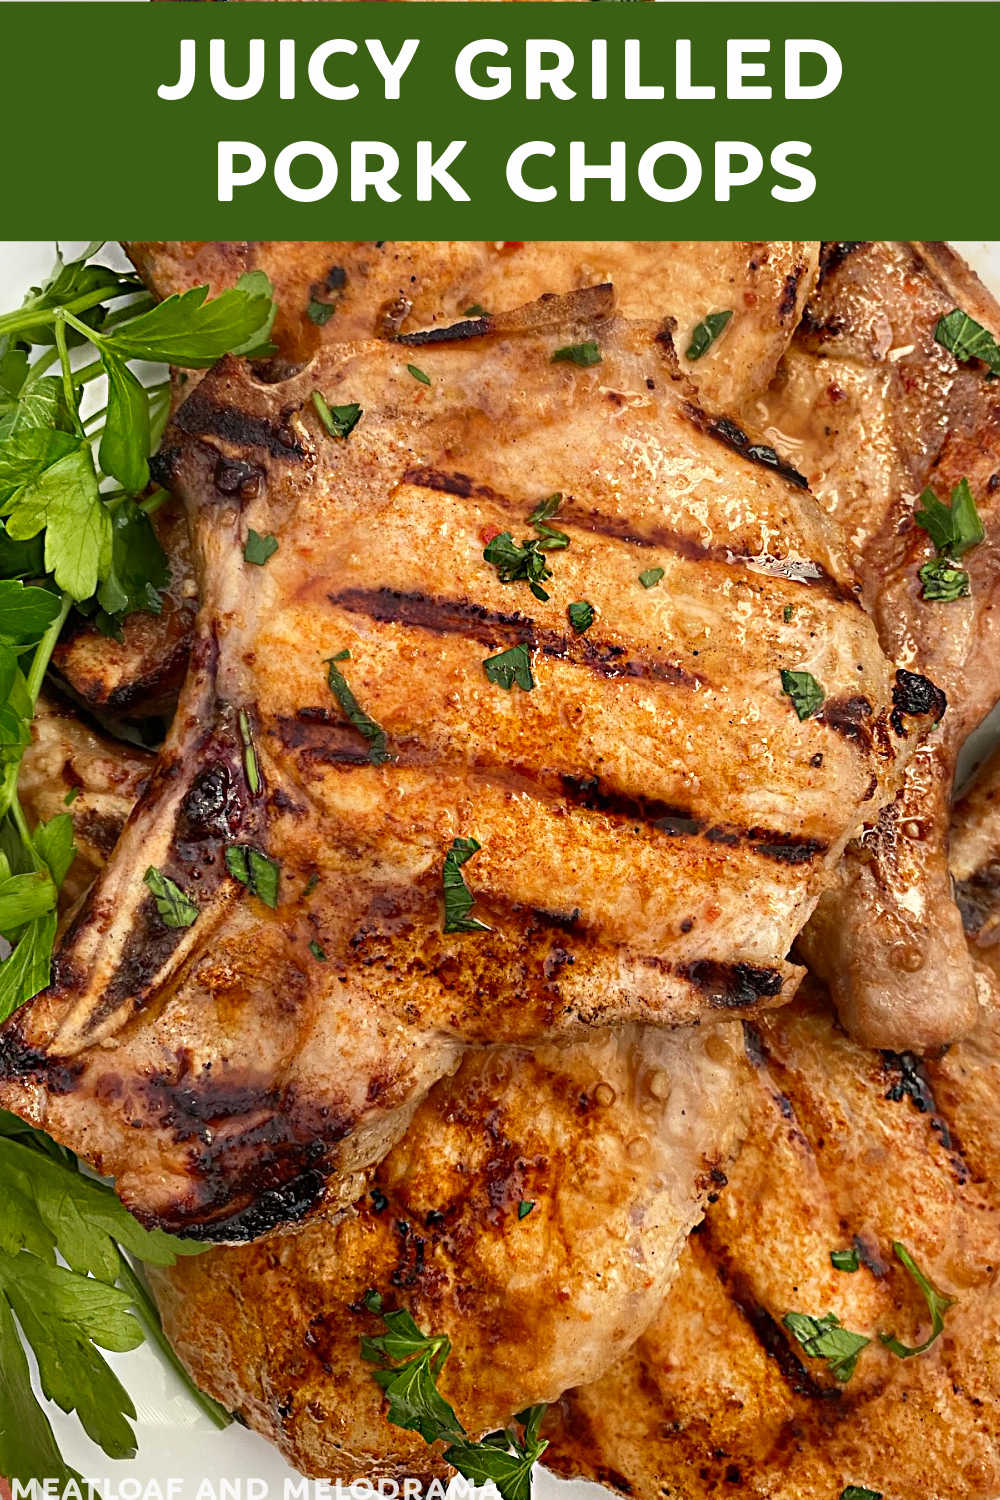 Juicy Grilled Pork Chops marinated in Italian Dressing and seasoned with dry rub are tender, flavorful and perfectly cooked on the gas grill or air fryer. This easy pork chop recipe takes minutes to make and is perfect when you want a quick and easy dinner the whole family will enjoy! via @meamel